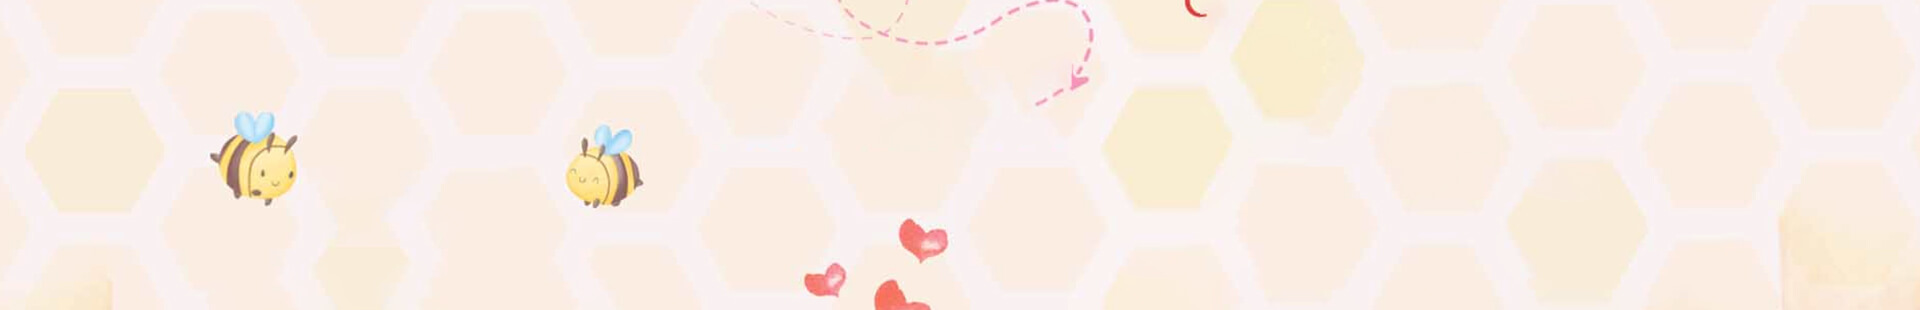 BlueBees4U Page Banner